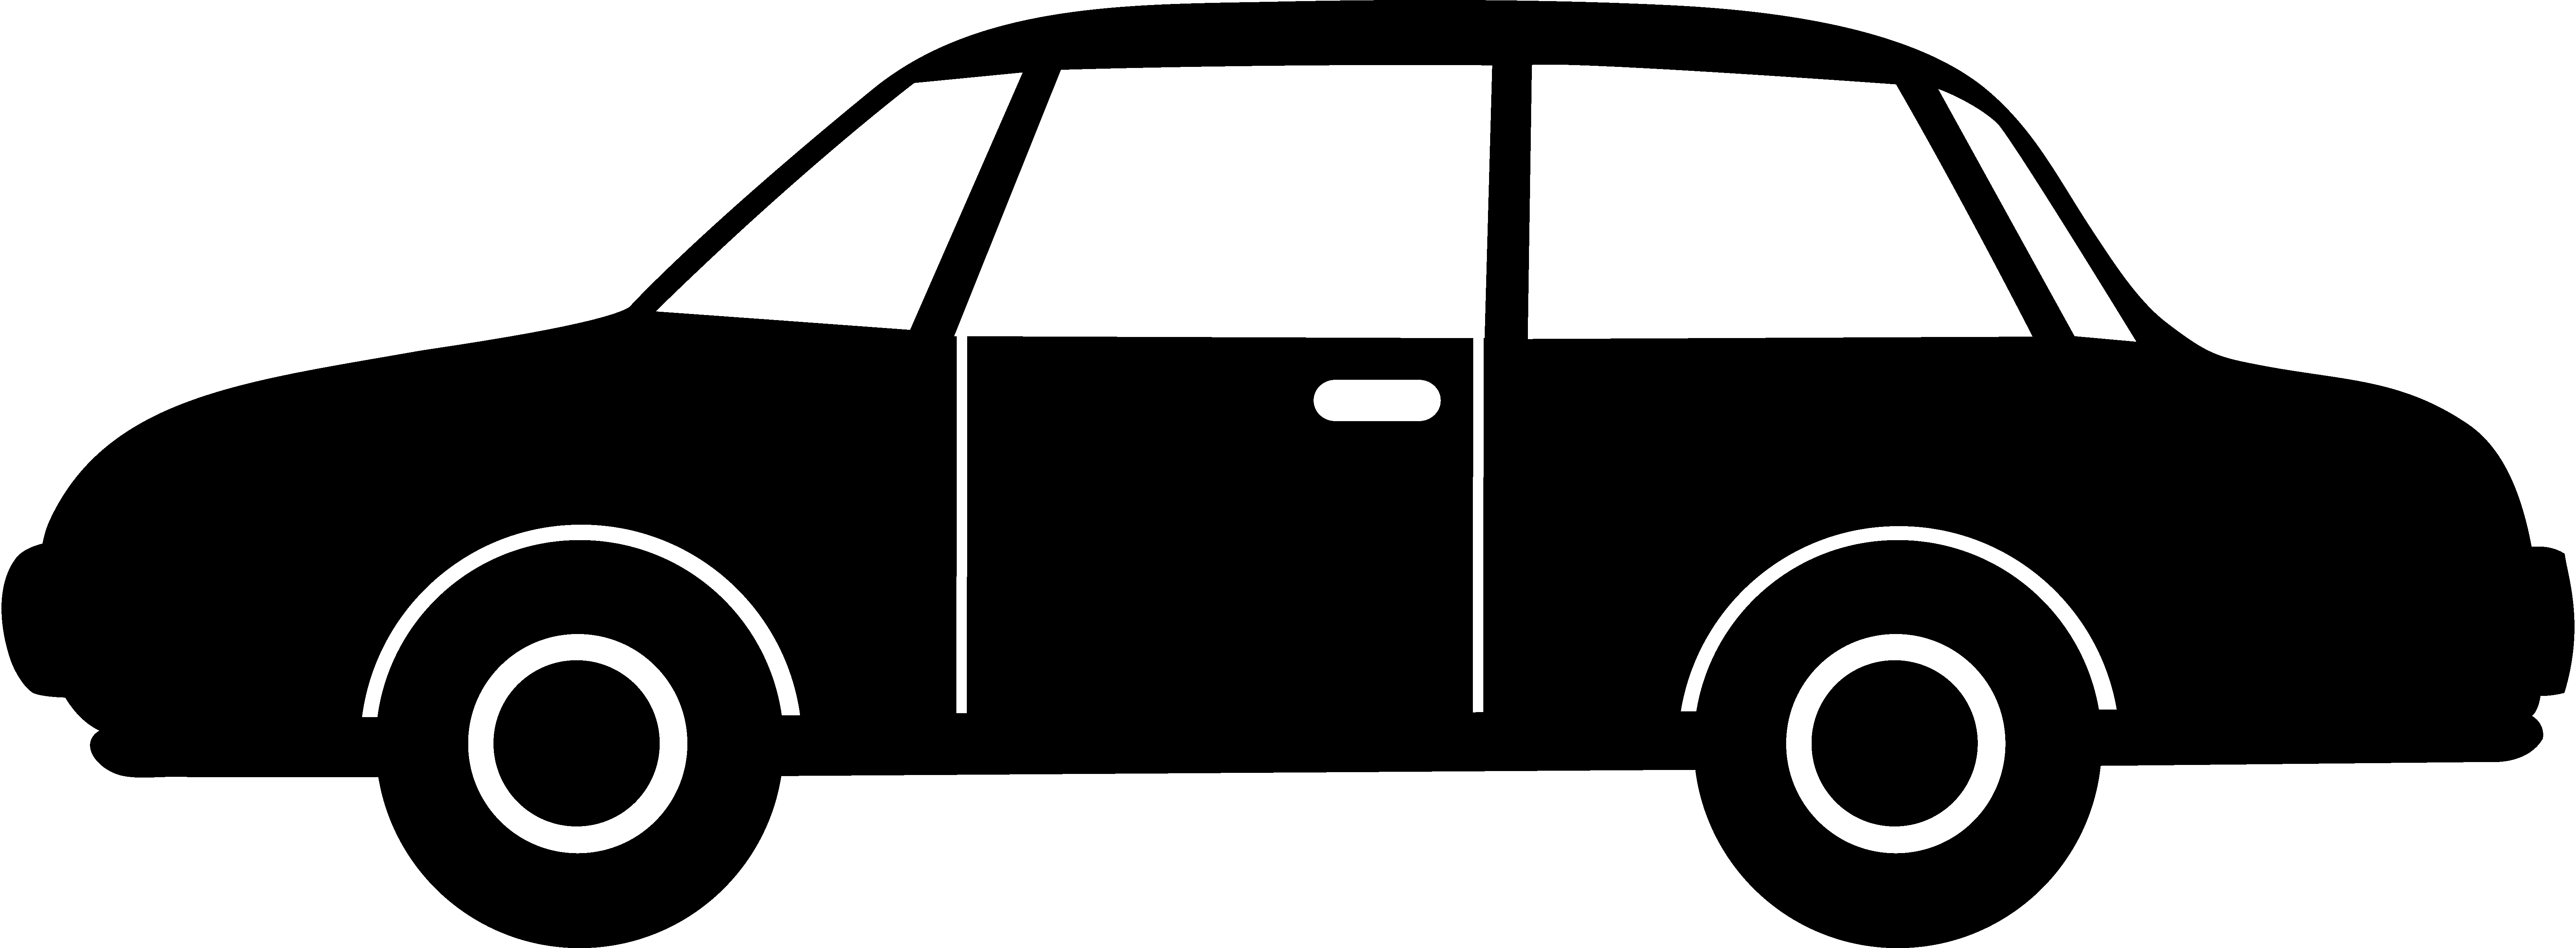 free clipart black and white car - photo #16